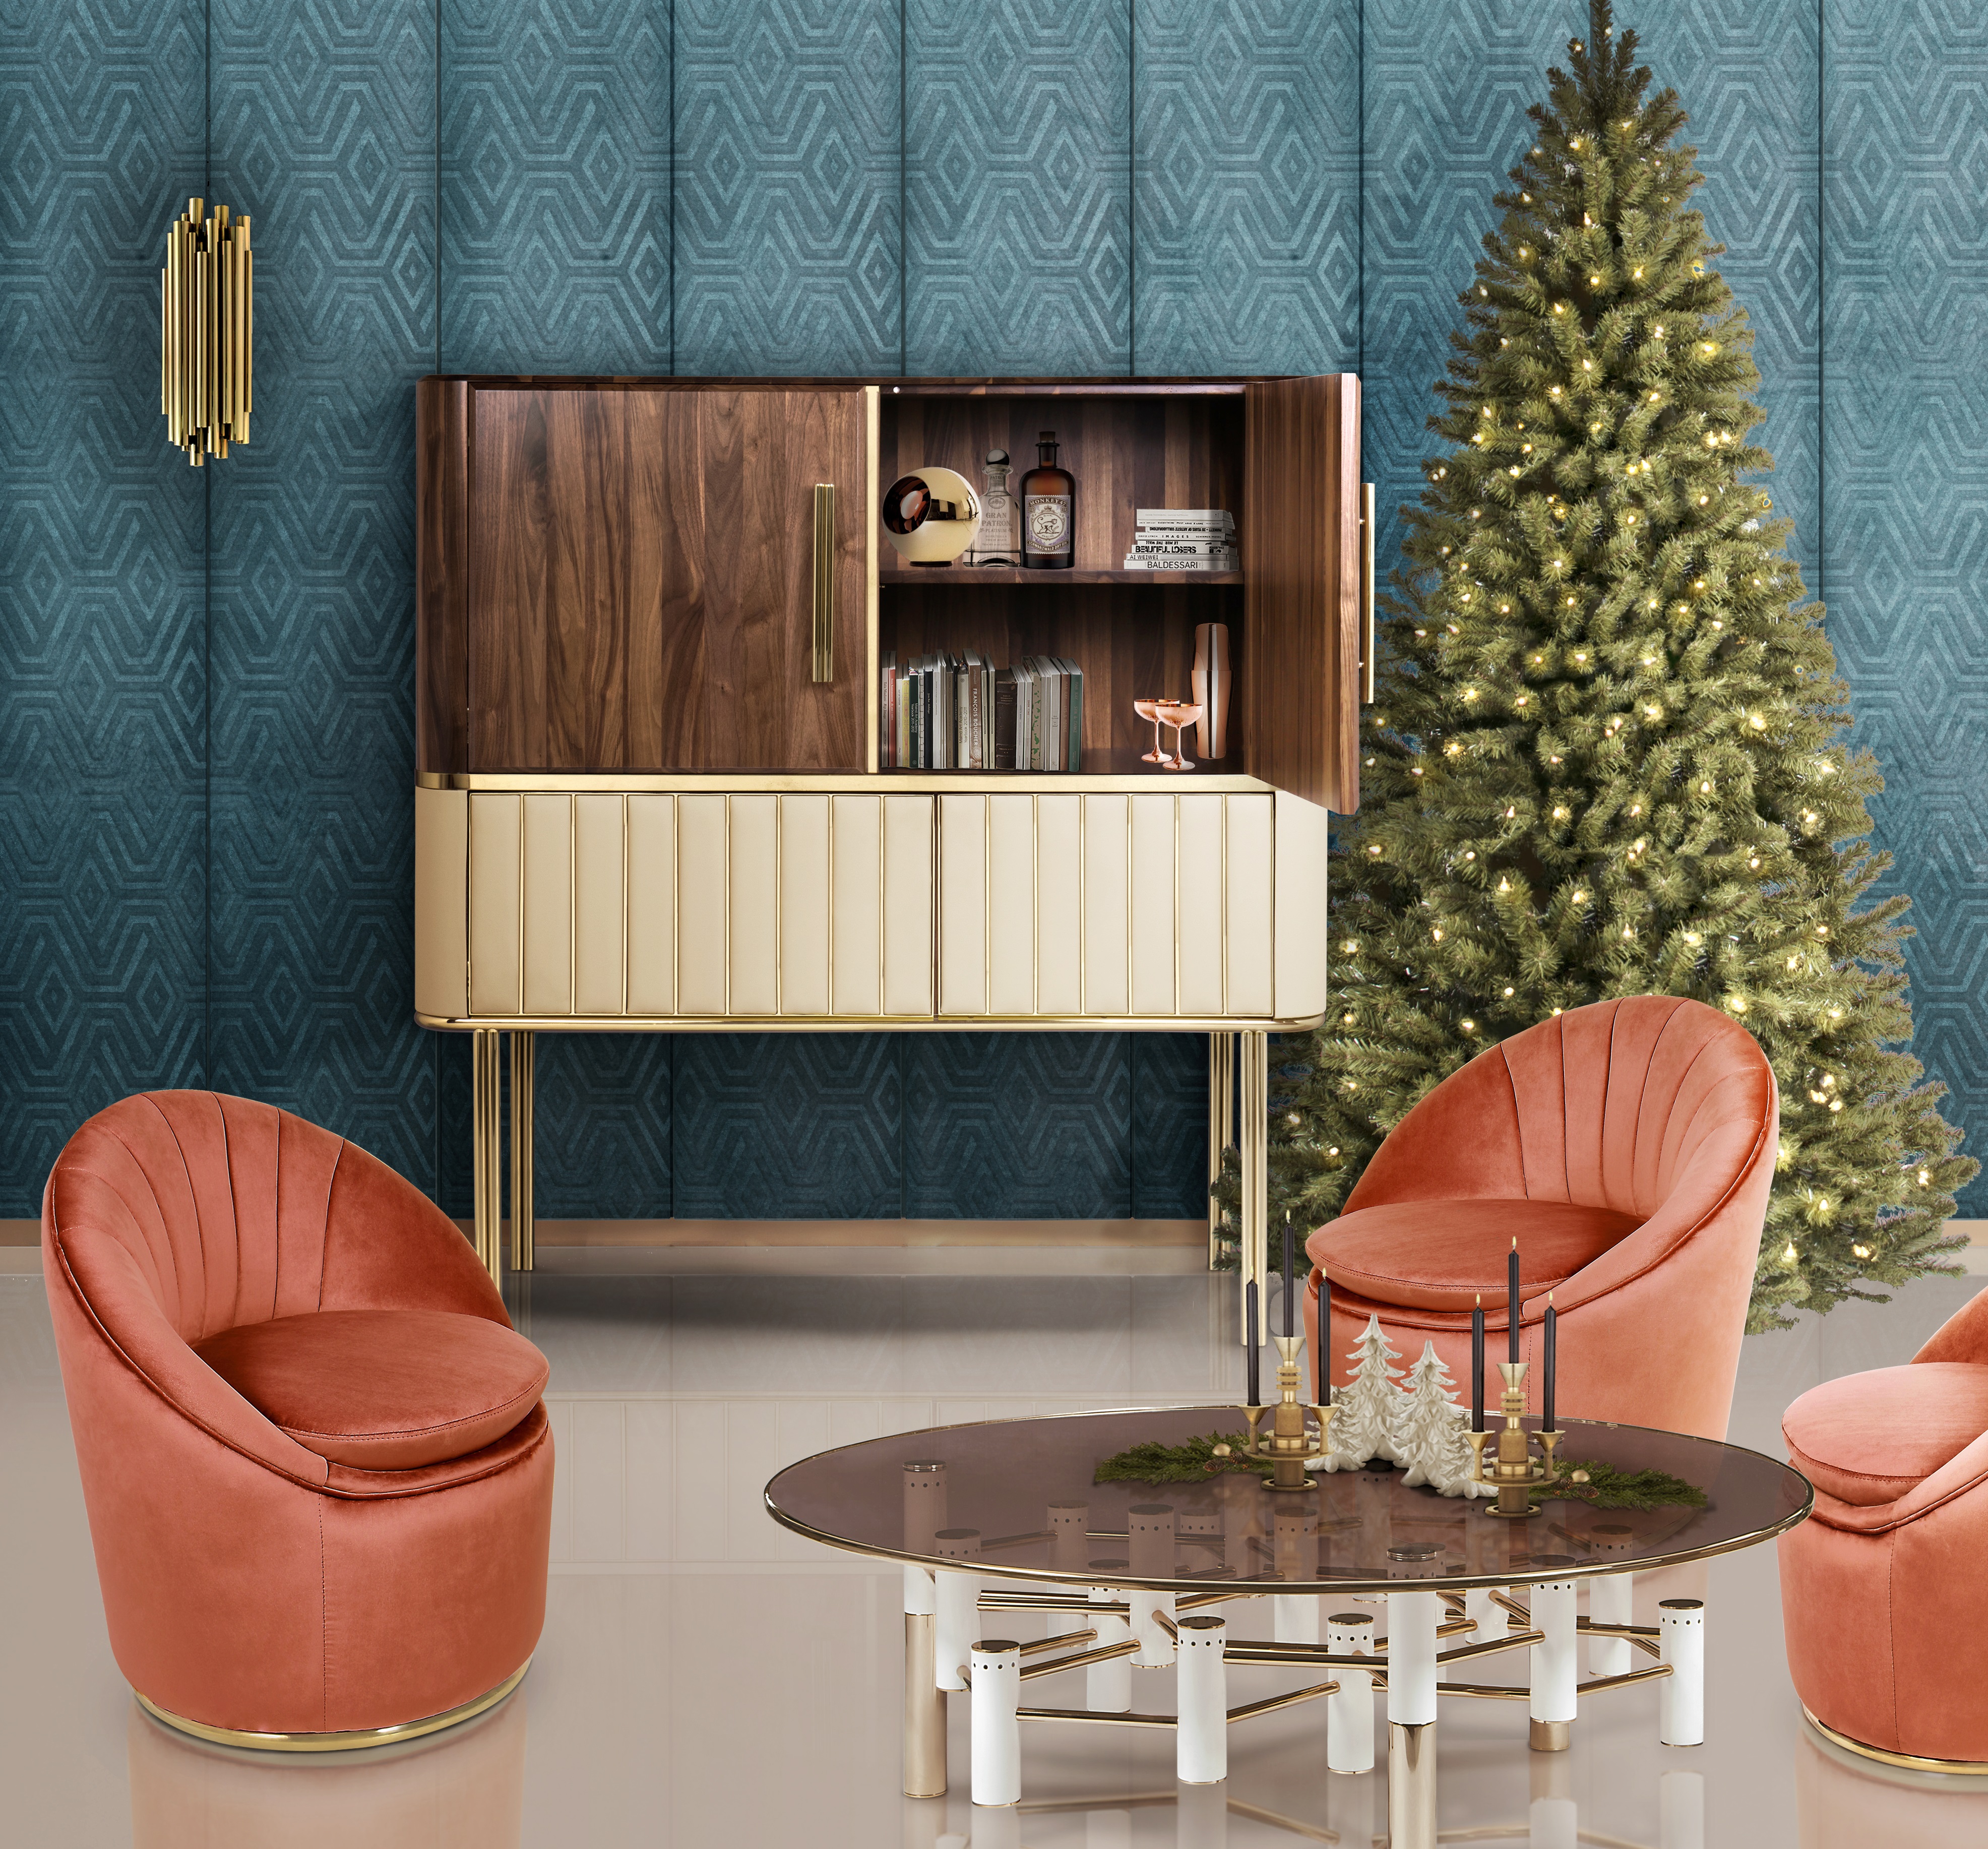 Learn How To Get The Perfect Christmas Eve Vibe With Our Decor Ideas 3 Christmas Eve Vibe